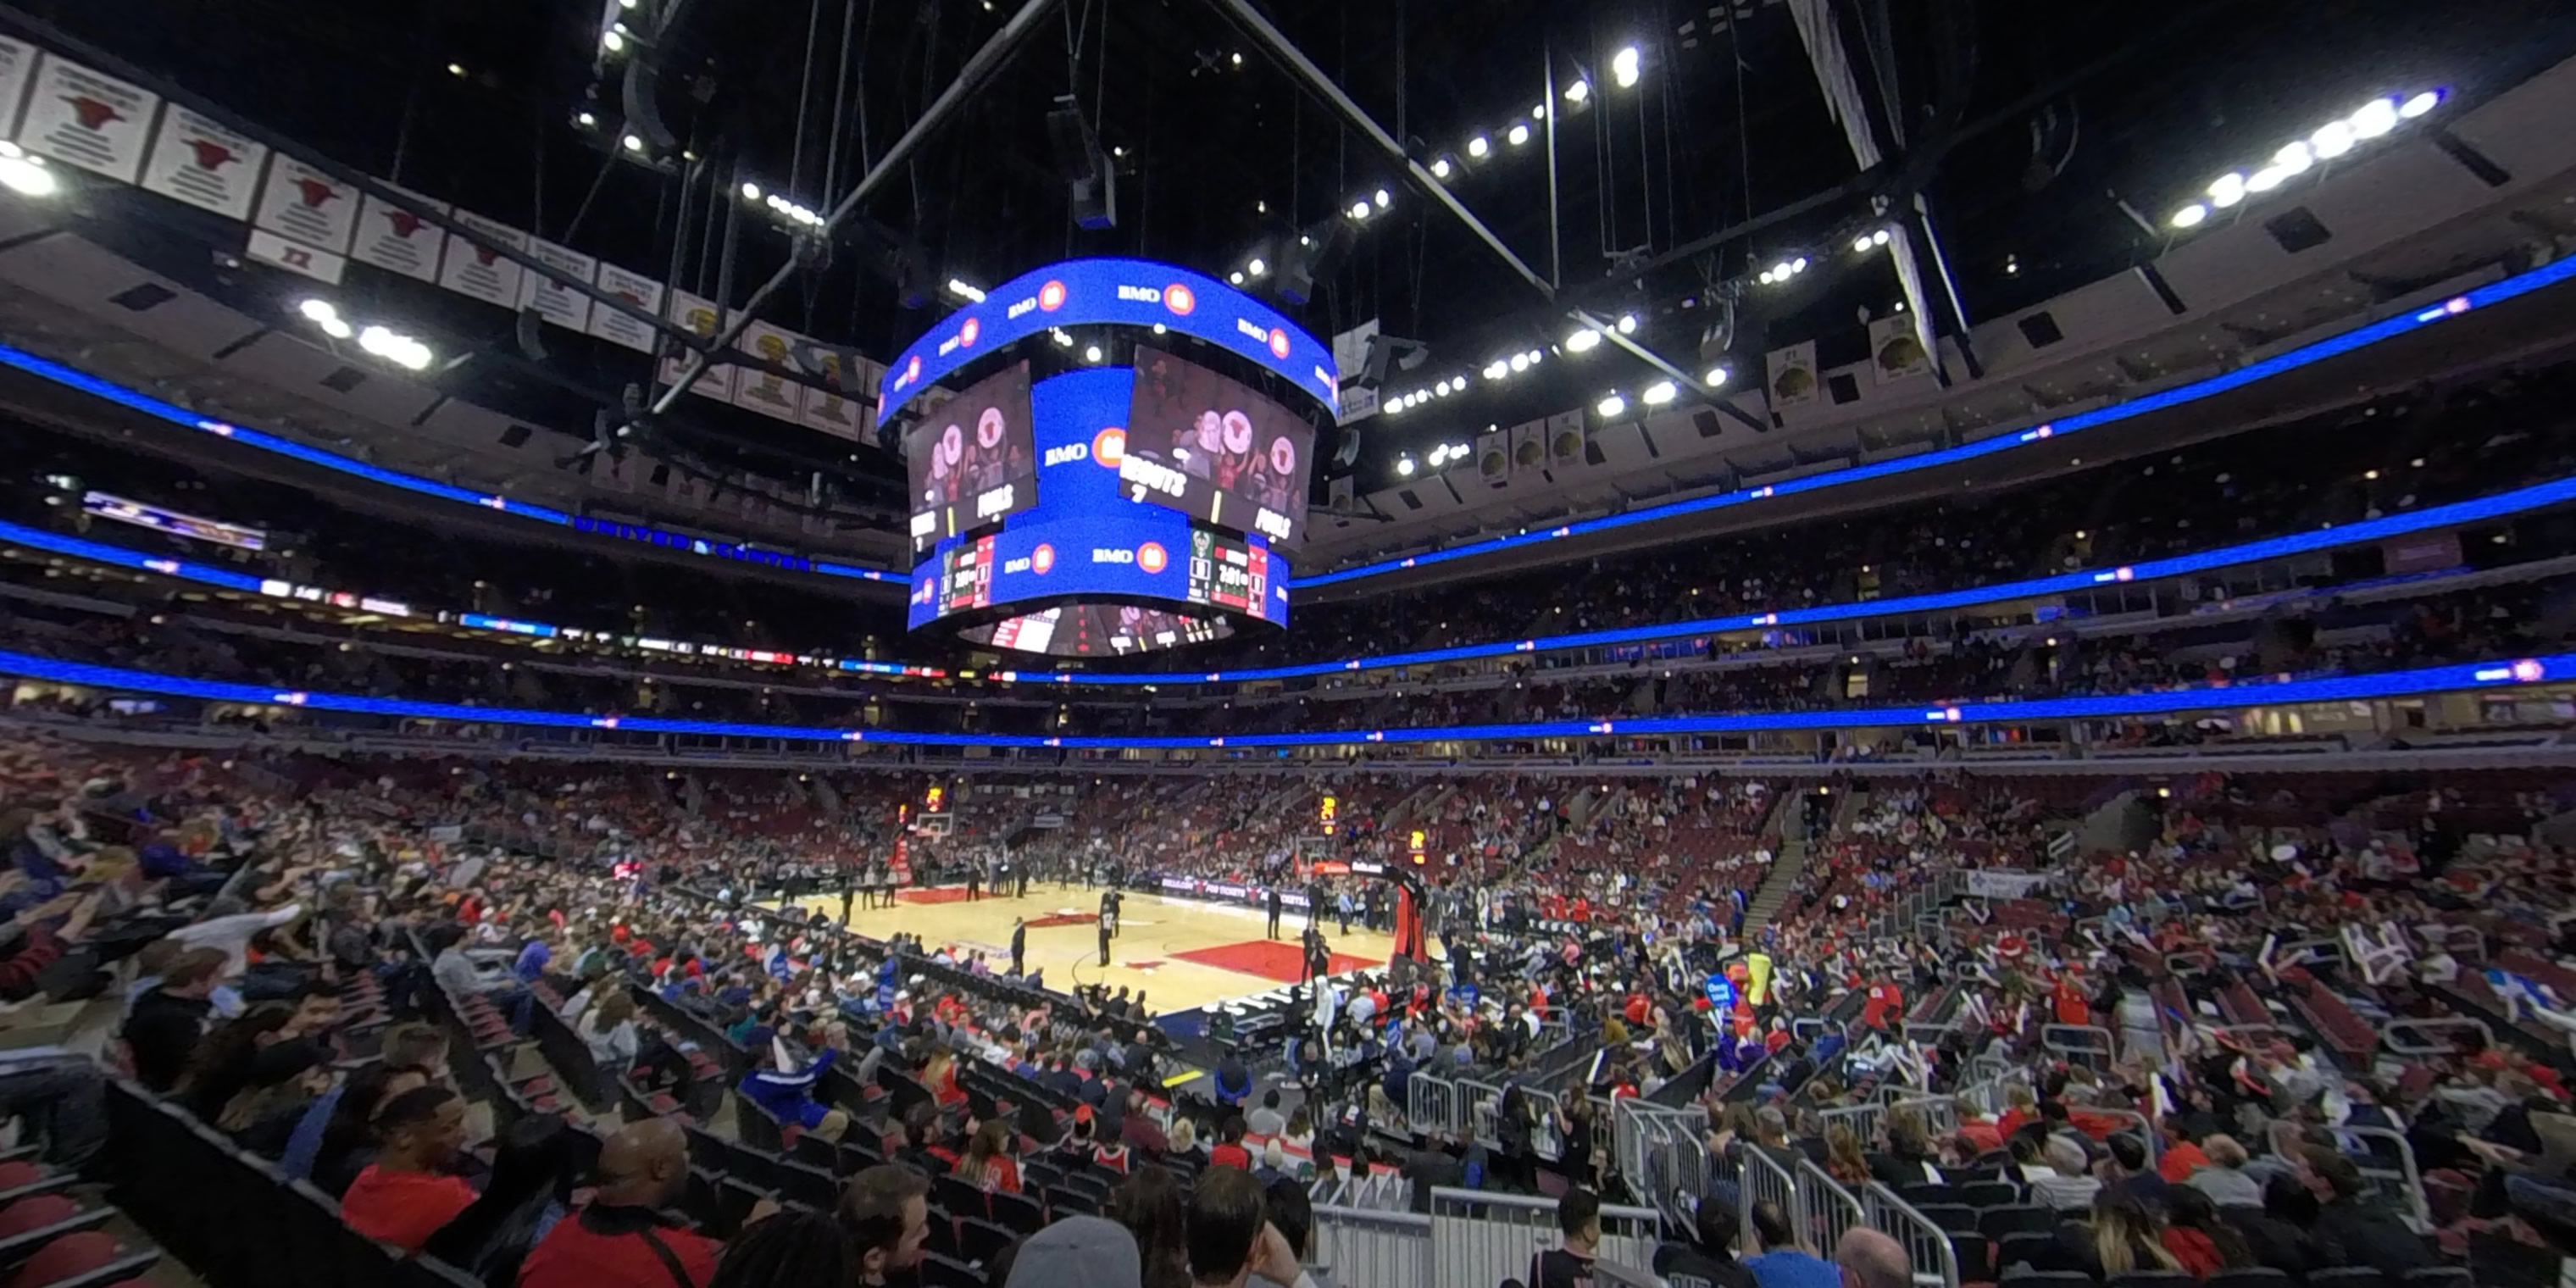 section 108 panoramic seat view  for basketball - united center